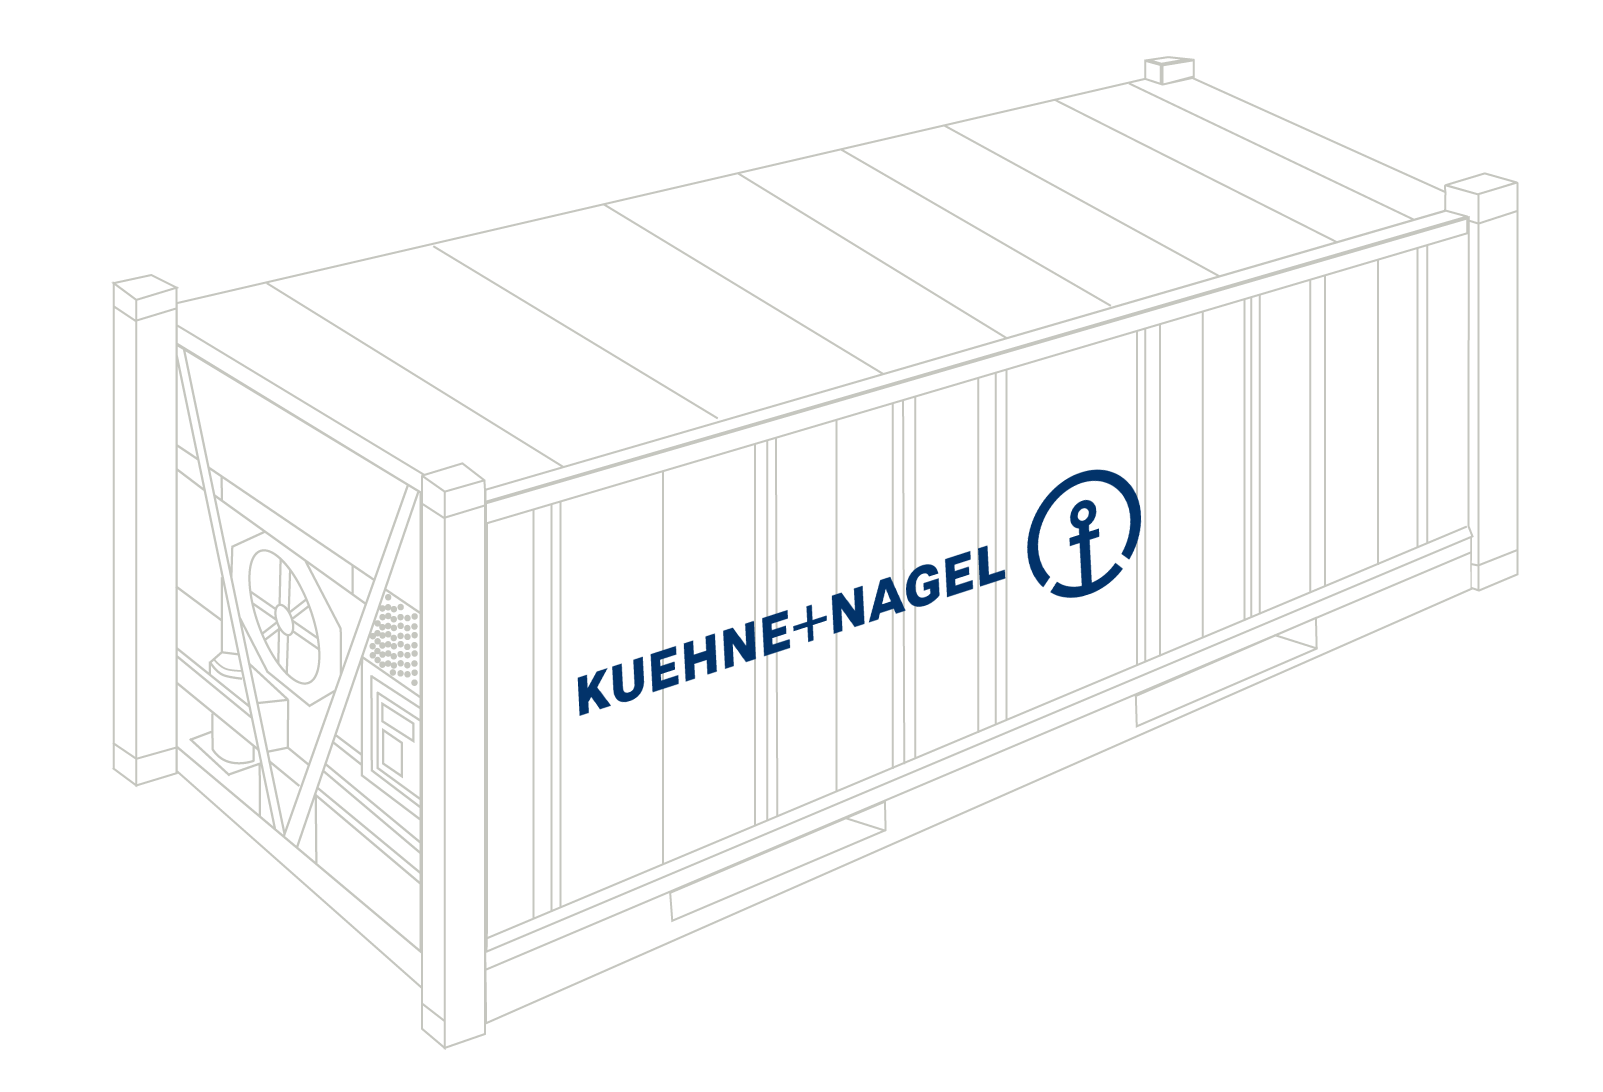 Refrigerated container